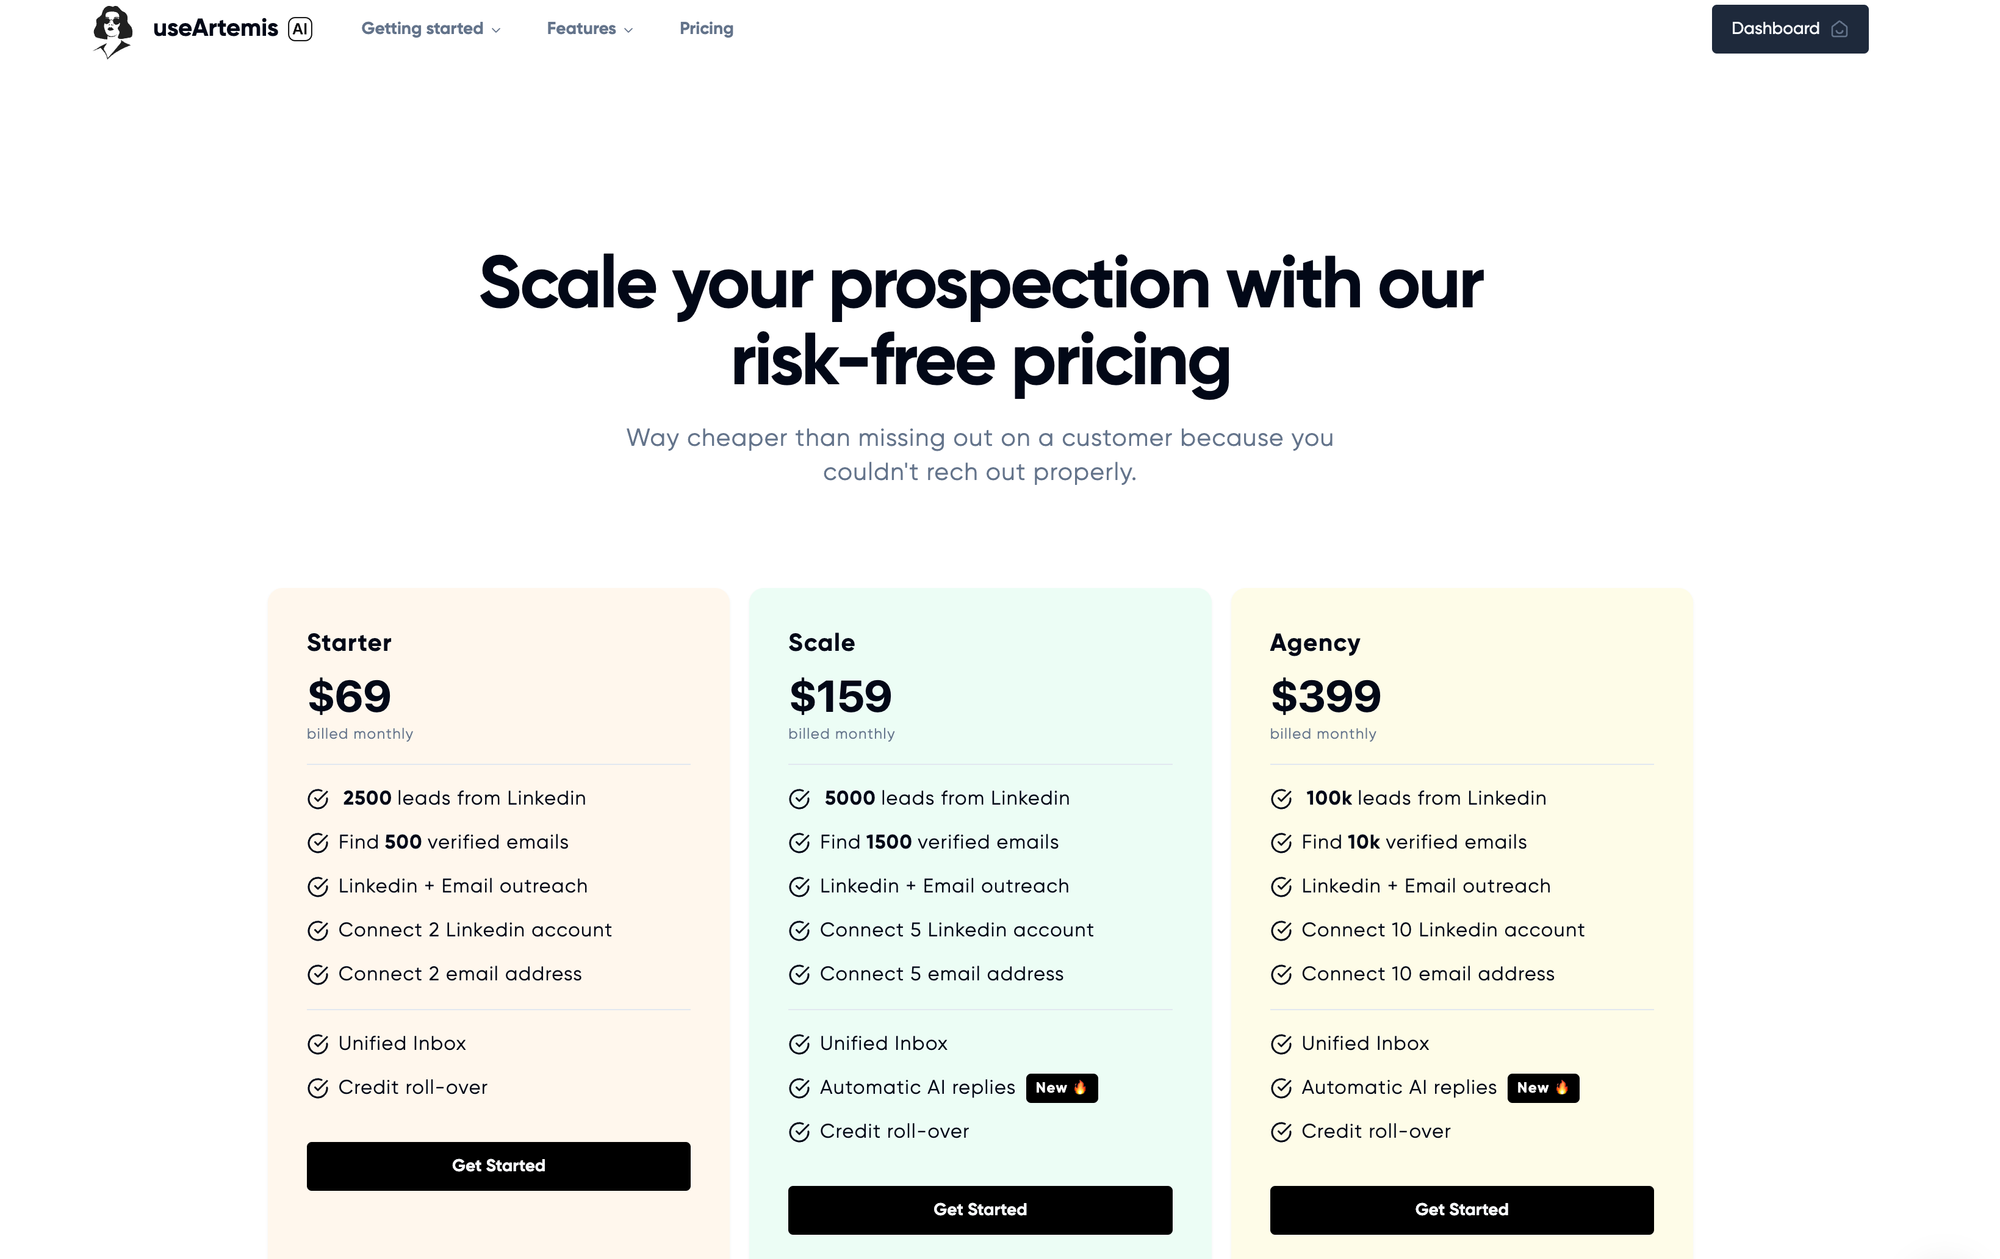 useartemis pricing page